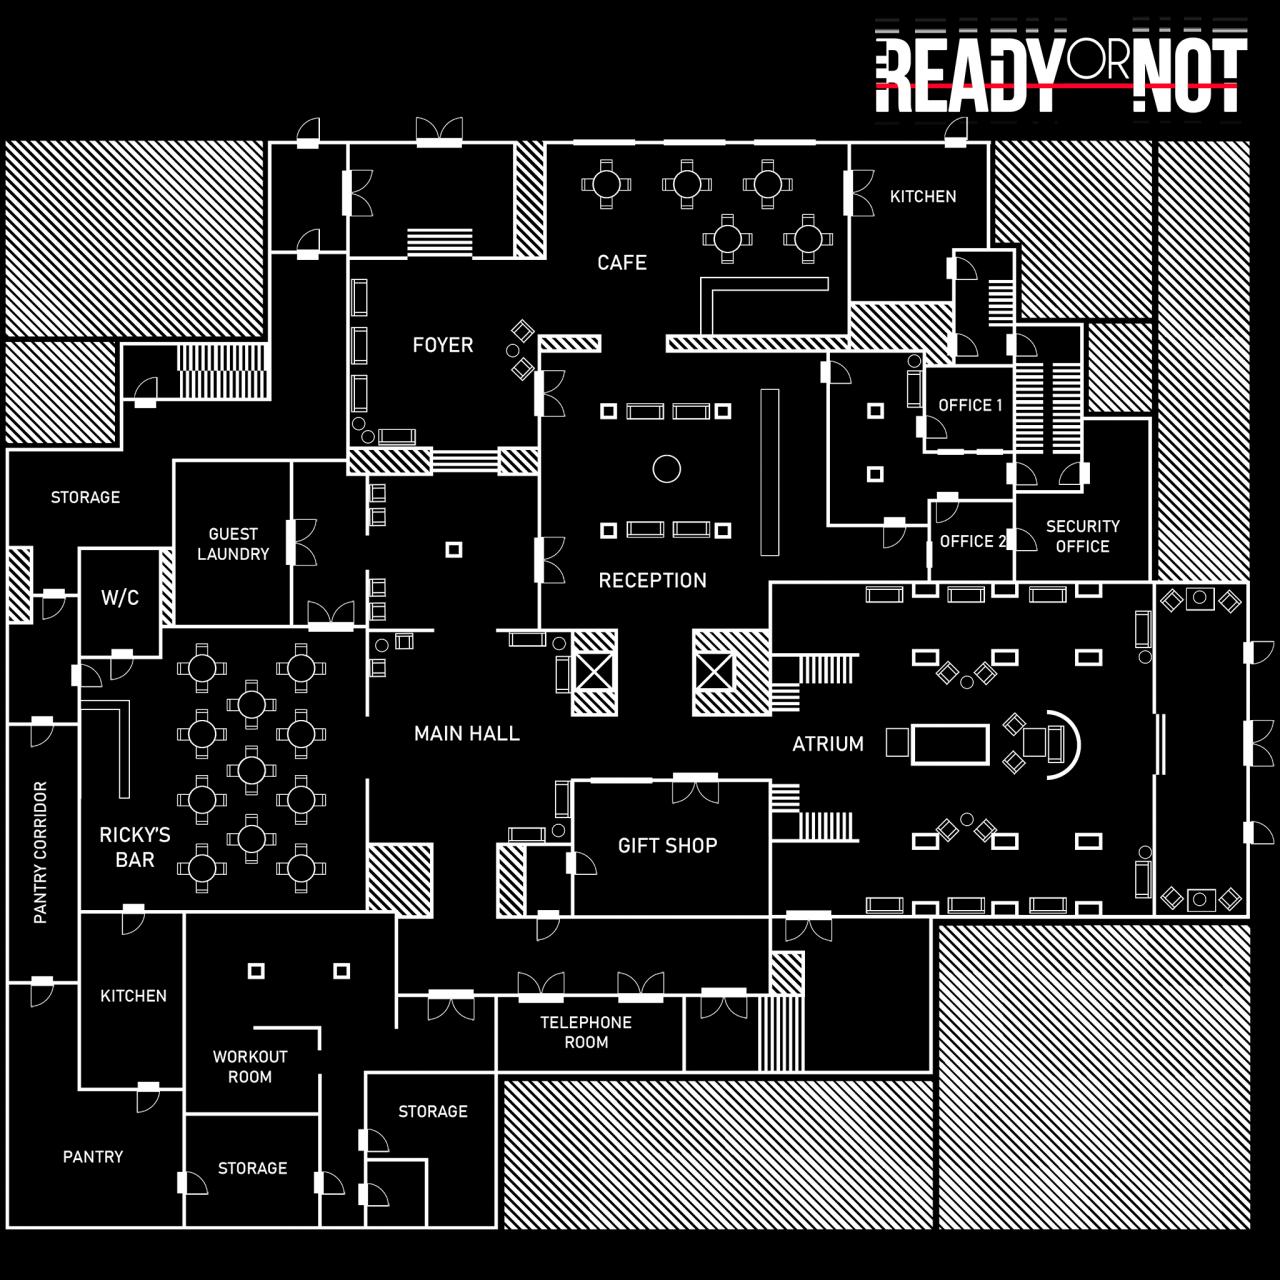 Ready or Not Map Blueprints Guide